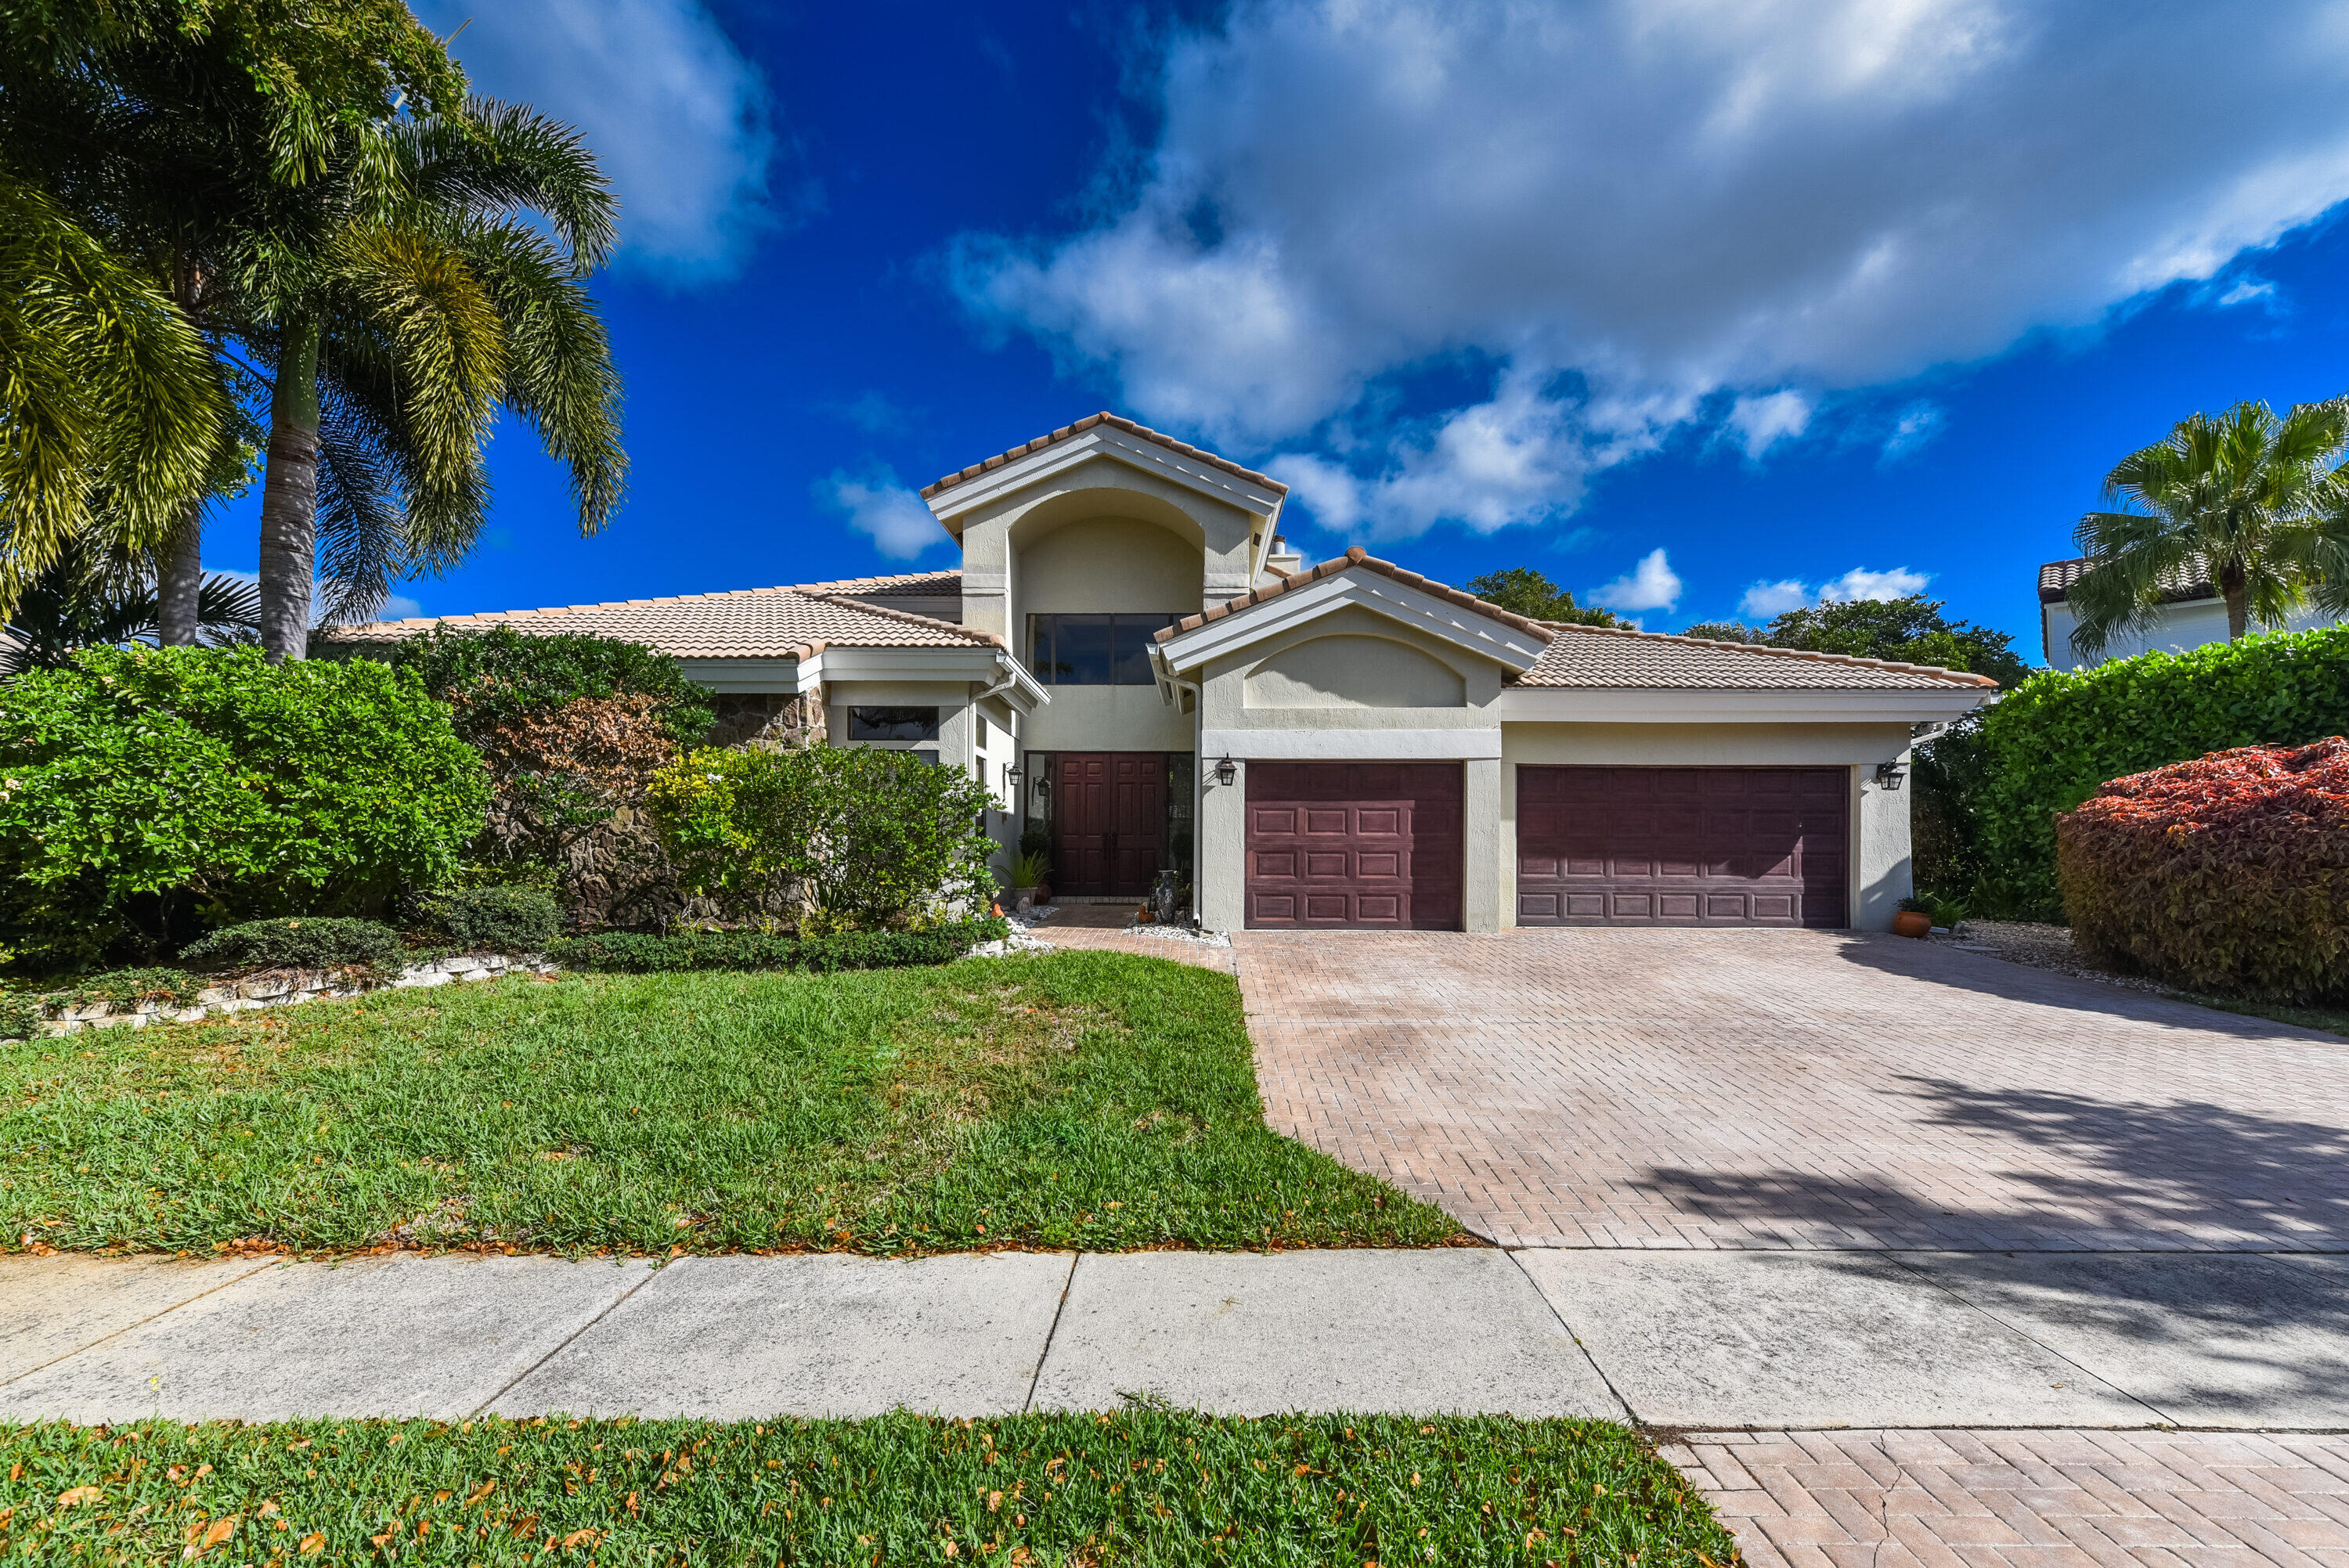 Property for Sale at 2551 Nw 46th Street, Boca Raton, Palm Beach County, Florida - Bedrooms: 4 
Bathrooms: 3.5  - $1,580,000